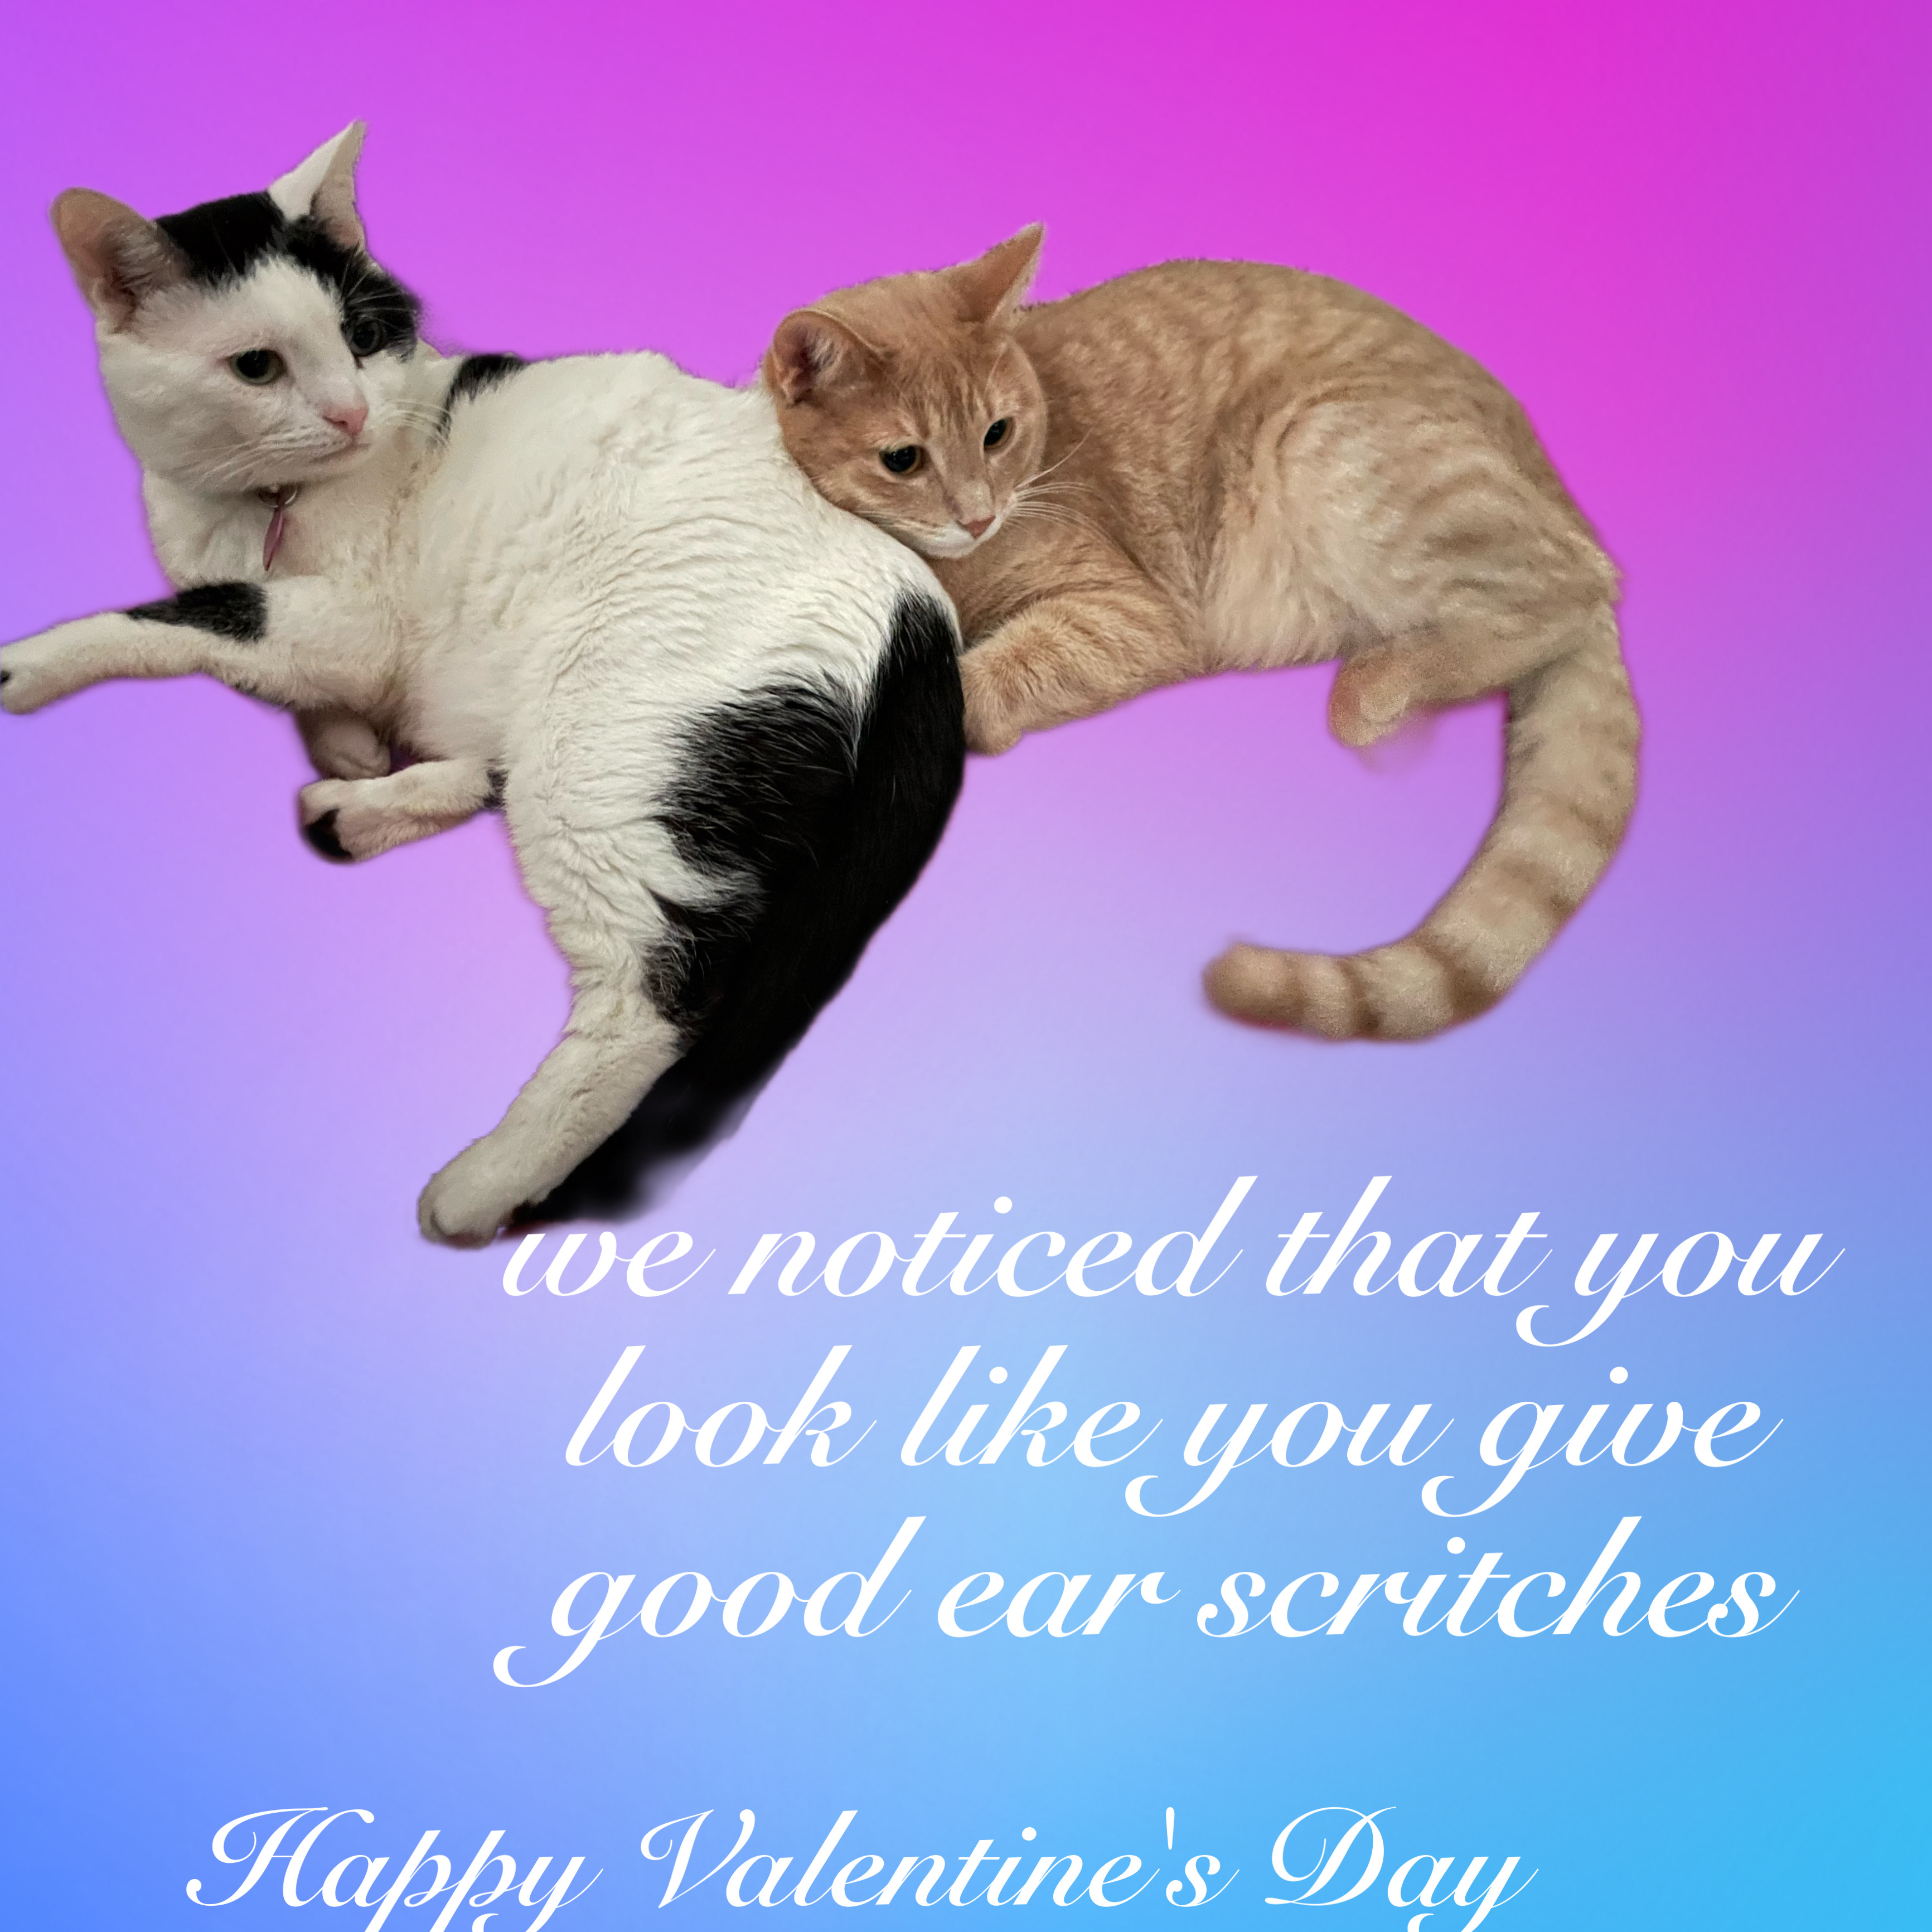 two cats lying down next to each other and looking to the right. text reads, "we noticed that you look like you give good ear scritches. Happy Valentine's Day."